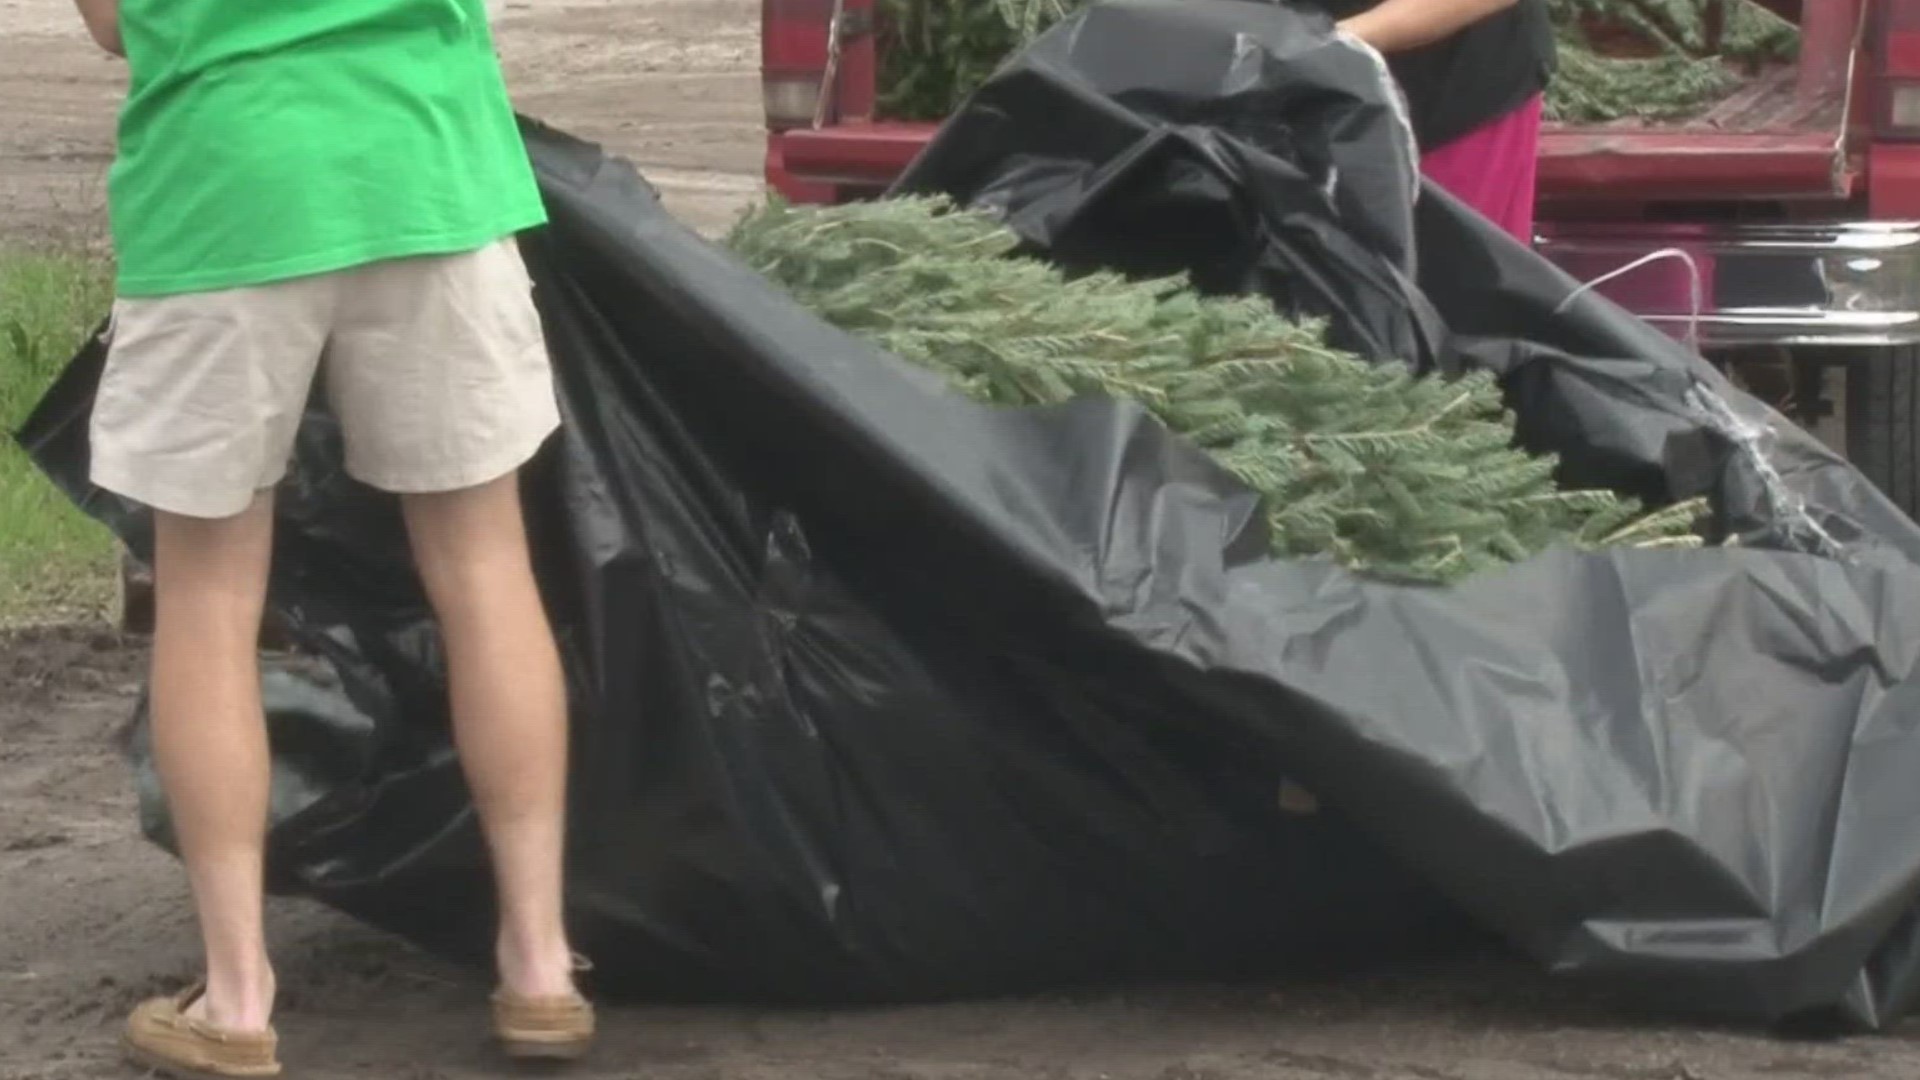 Wondering what to do with your Christmas tree? Shelly Garzon tells us how you can get rid of your tree and help the environment all at the same time.